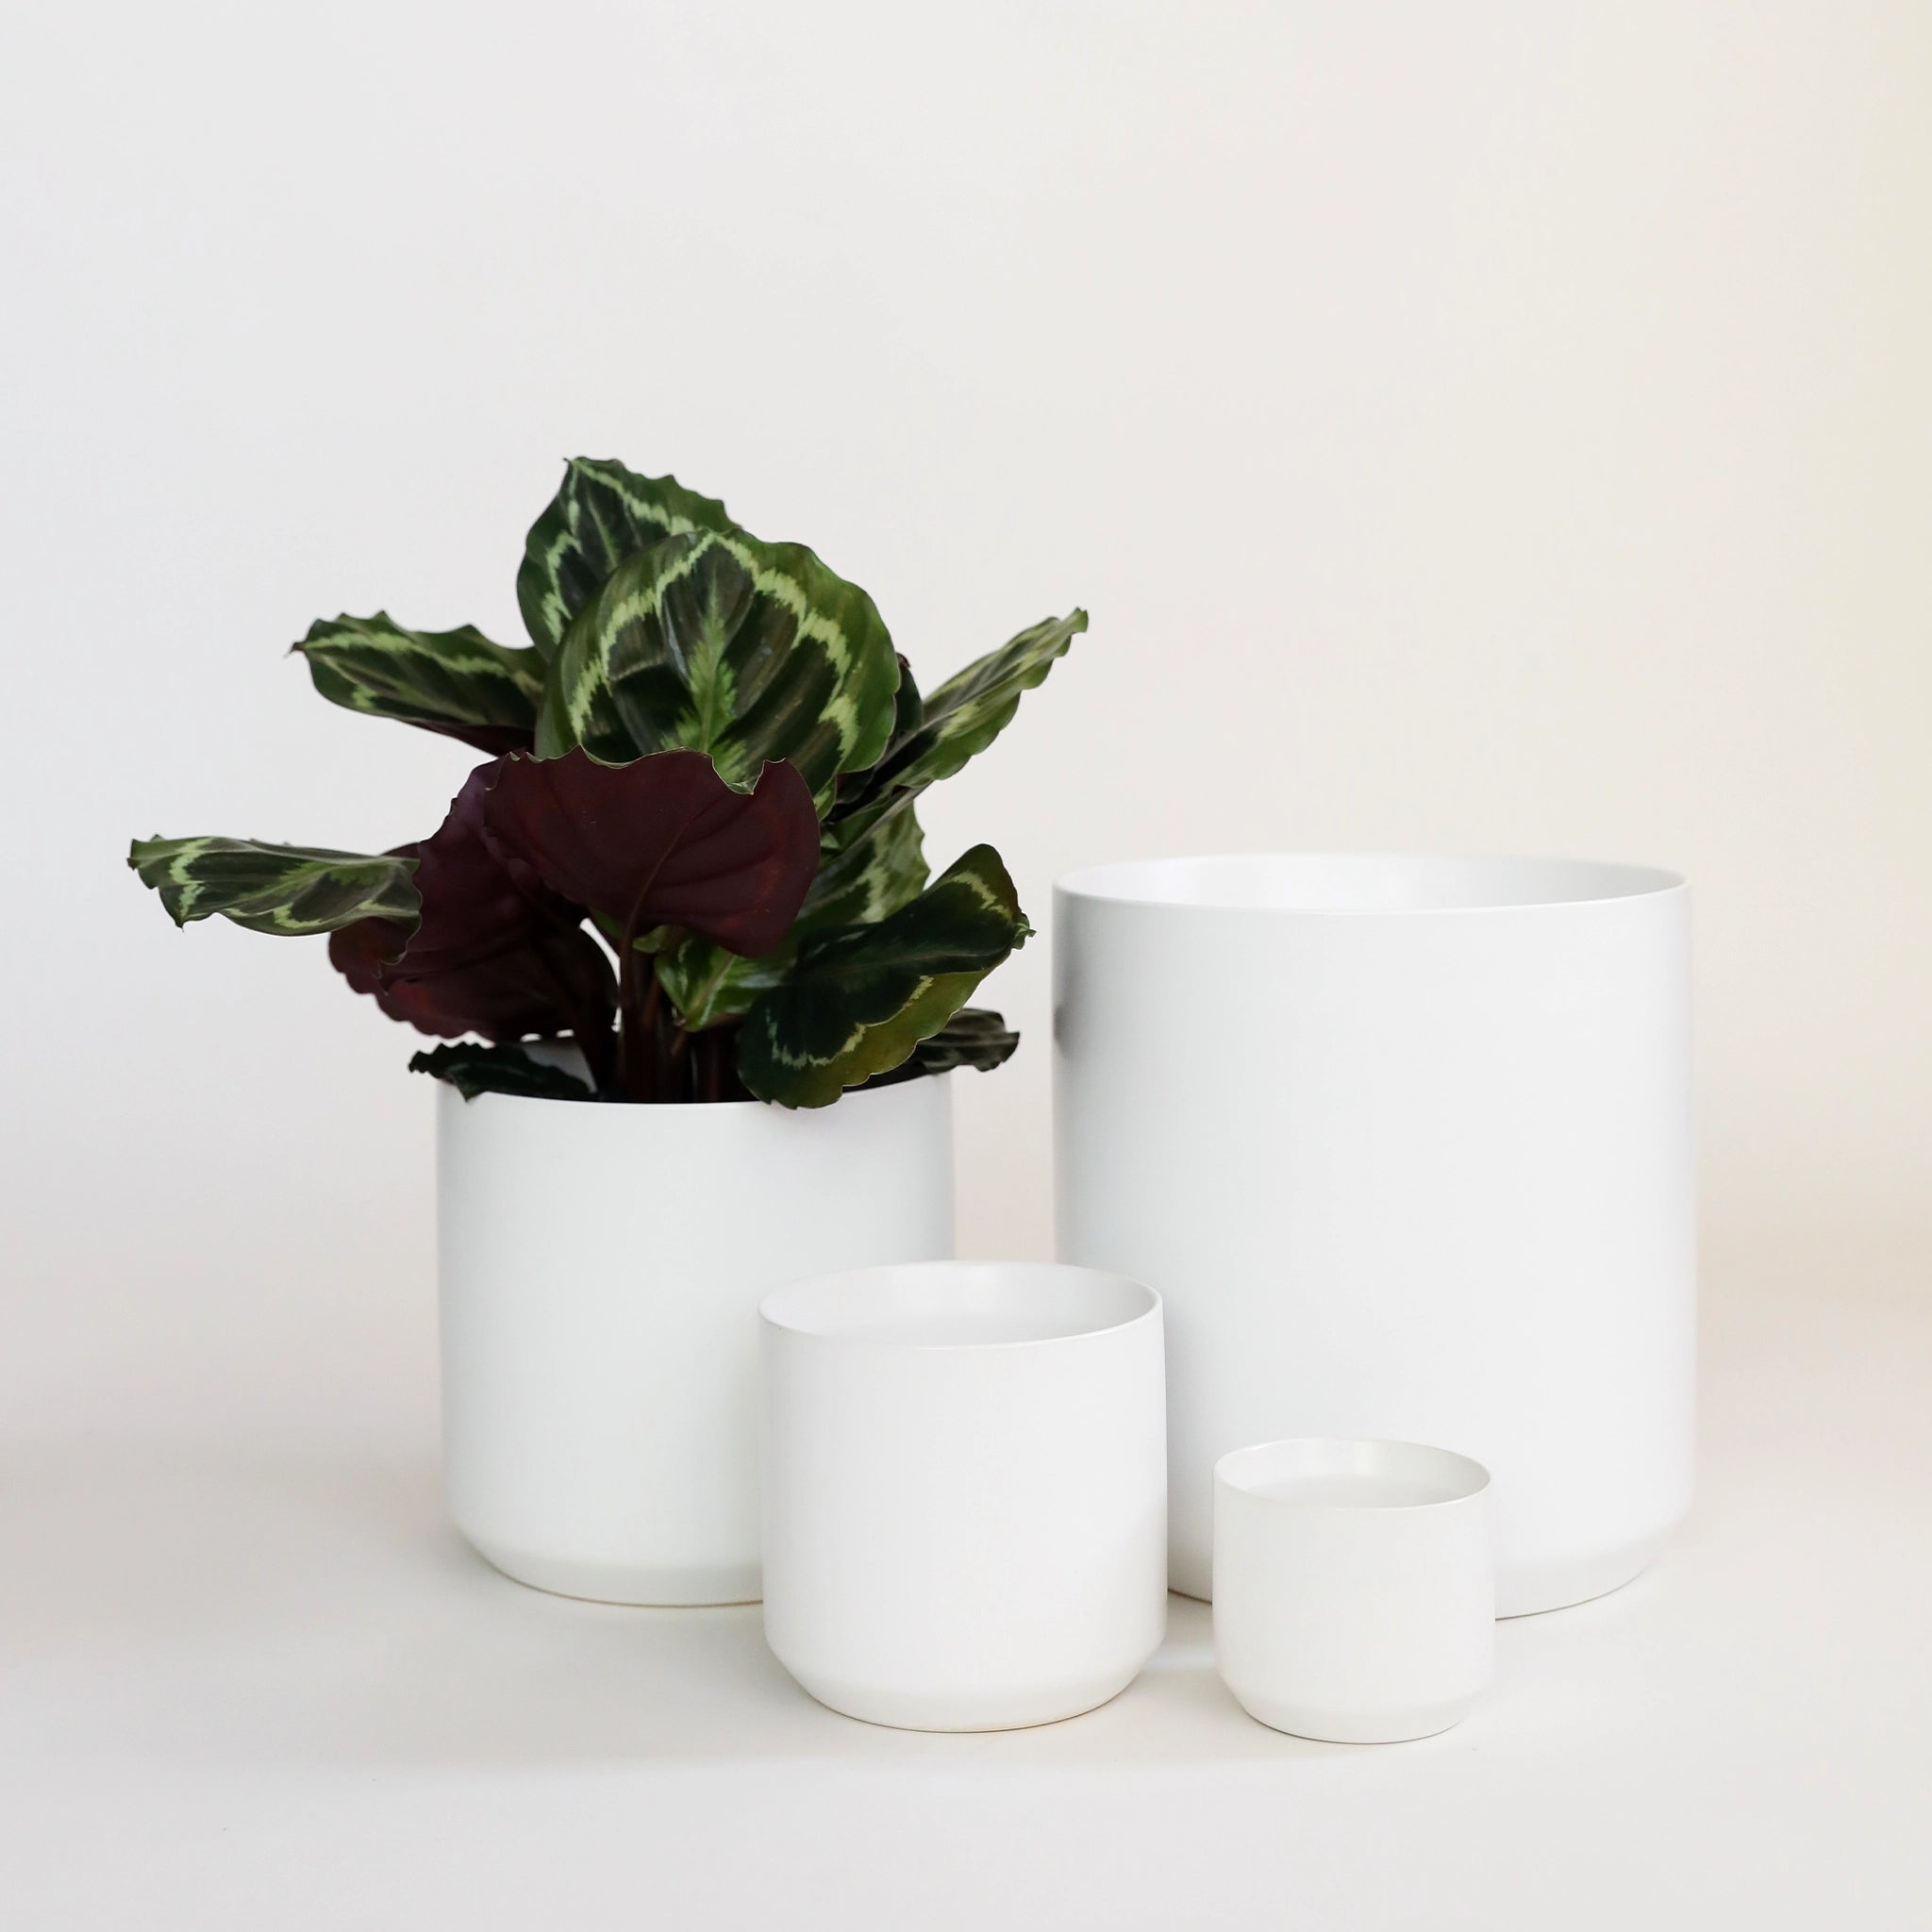 various sizes of simple white pots sit on a white ground. one pot has a green and purple calathea placed inside